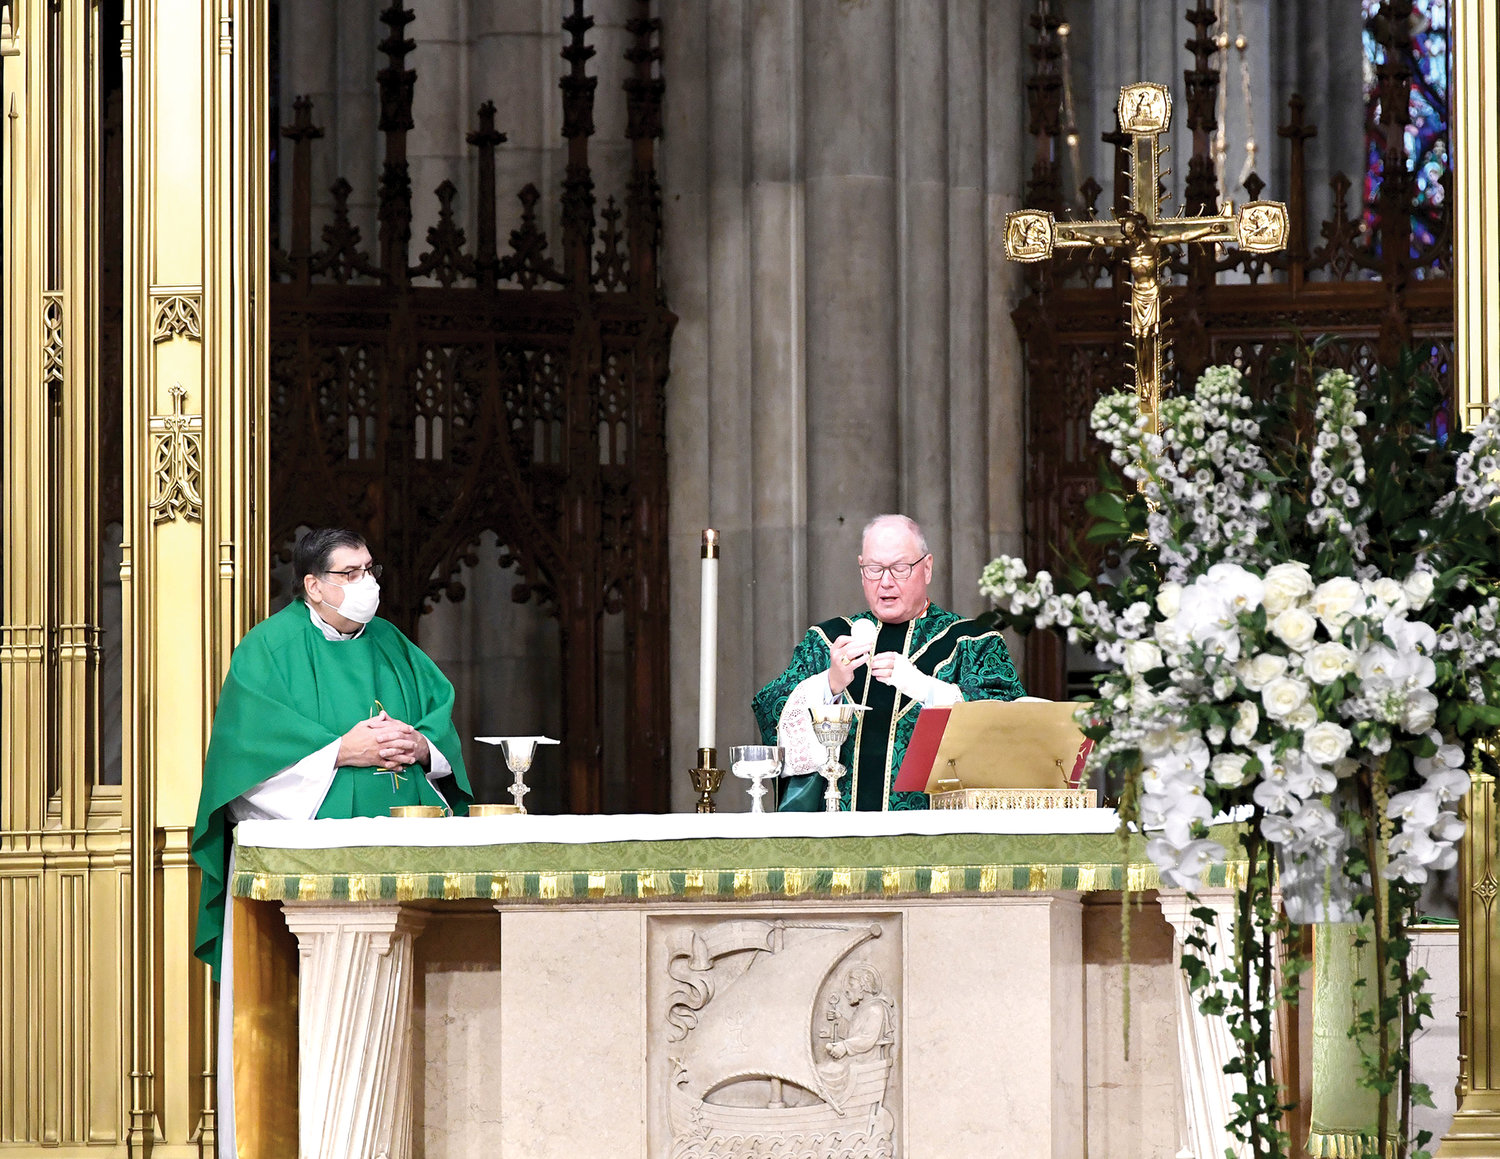 Cardinal Dolan consecrates the Eucharist during the World Mission Sunday Mass at St. Patrick’s Cathedral Oct. 18. With the cardinal is Msgr. Marc Filacchione, director of the archdiocesan Society for the Propagation of the Faith.